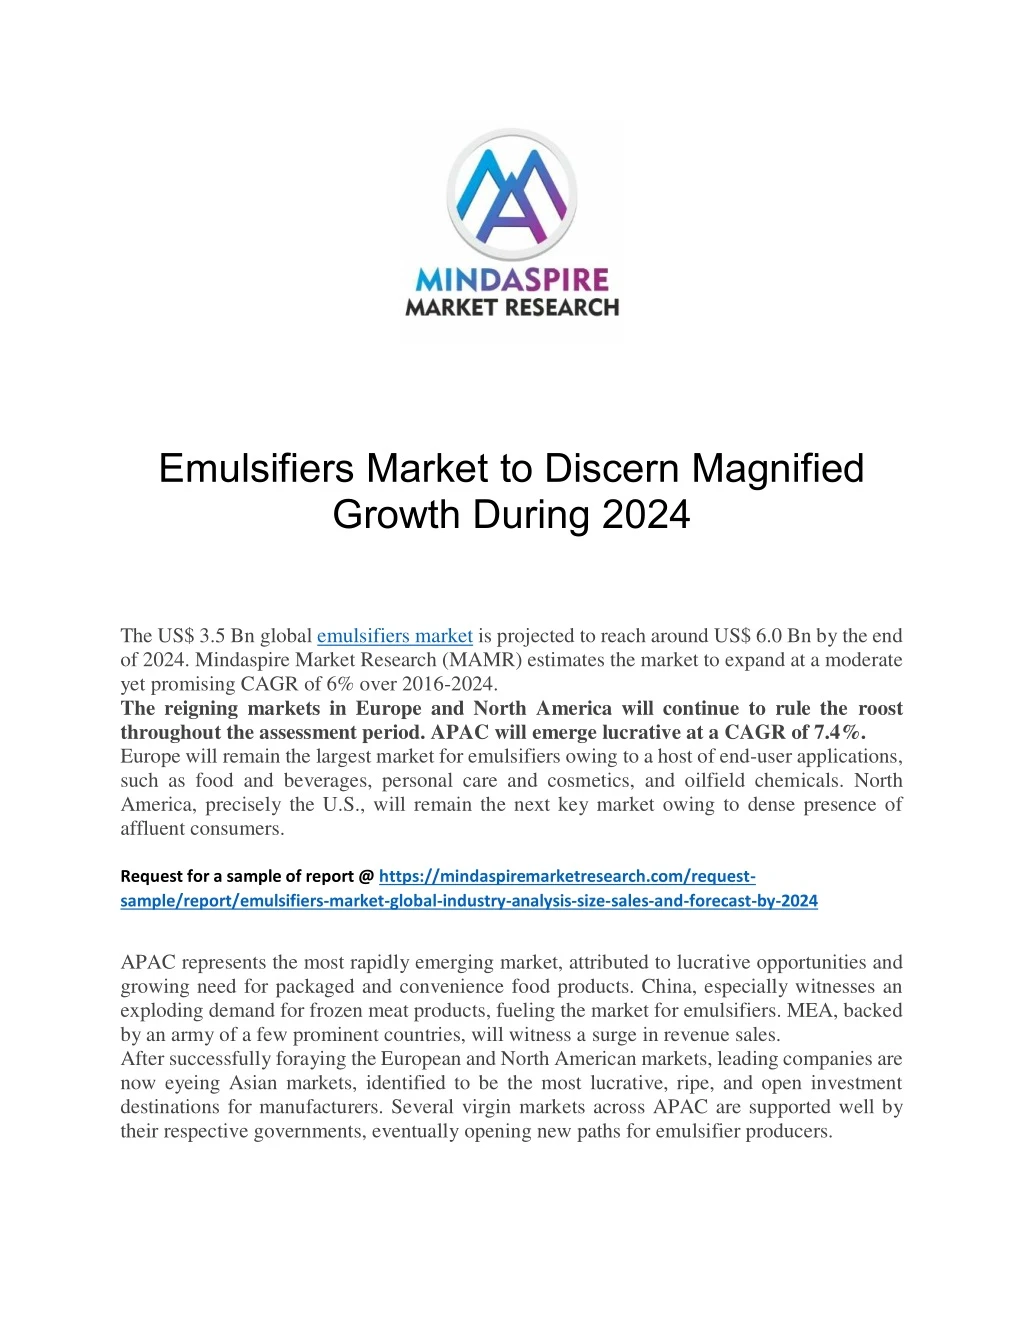 emulsifiers market to discern magnified growth